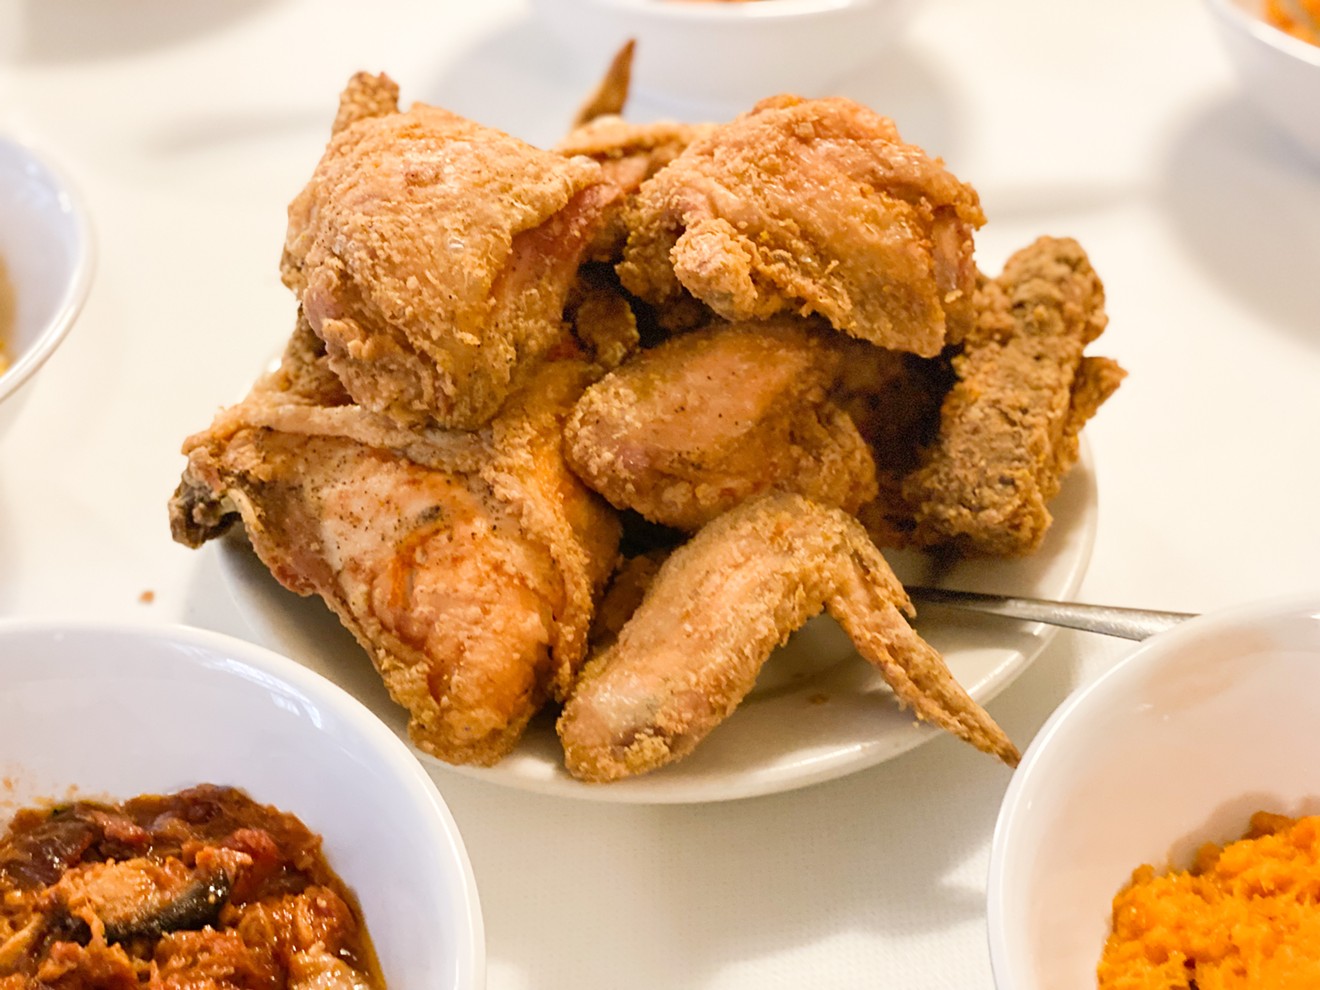 The famous fried chicken at Mrs. Wilkes' Dining Room is back on the table.